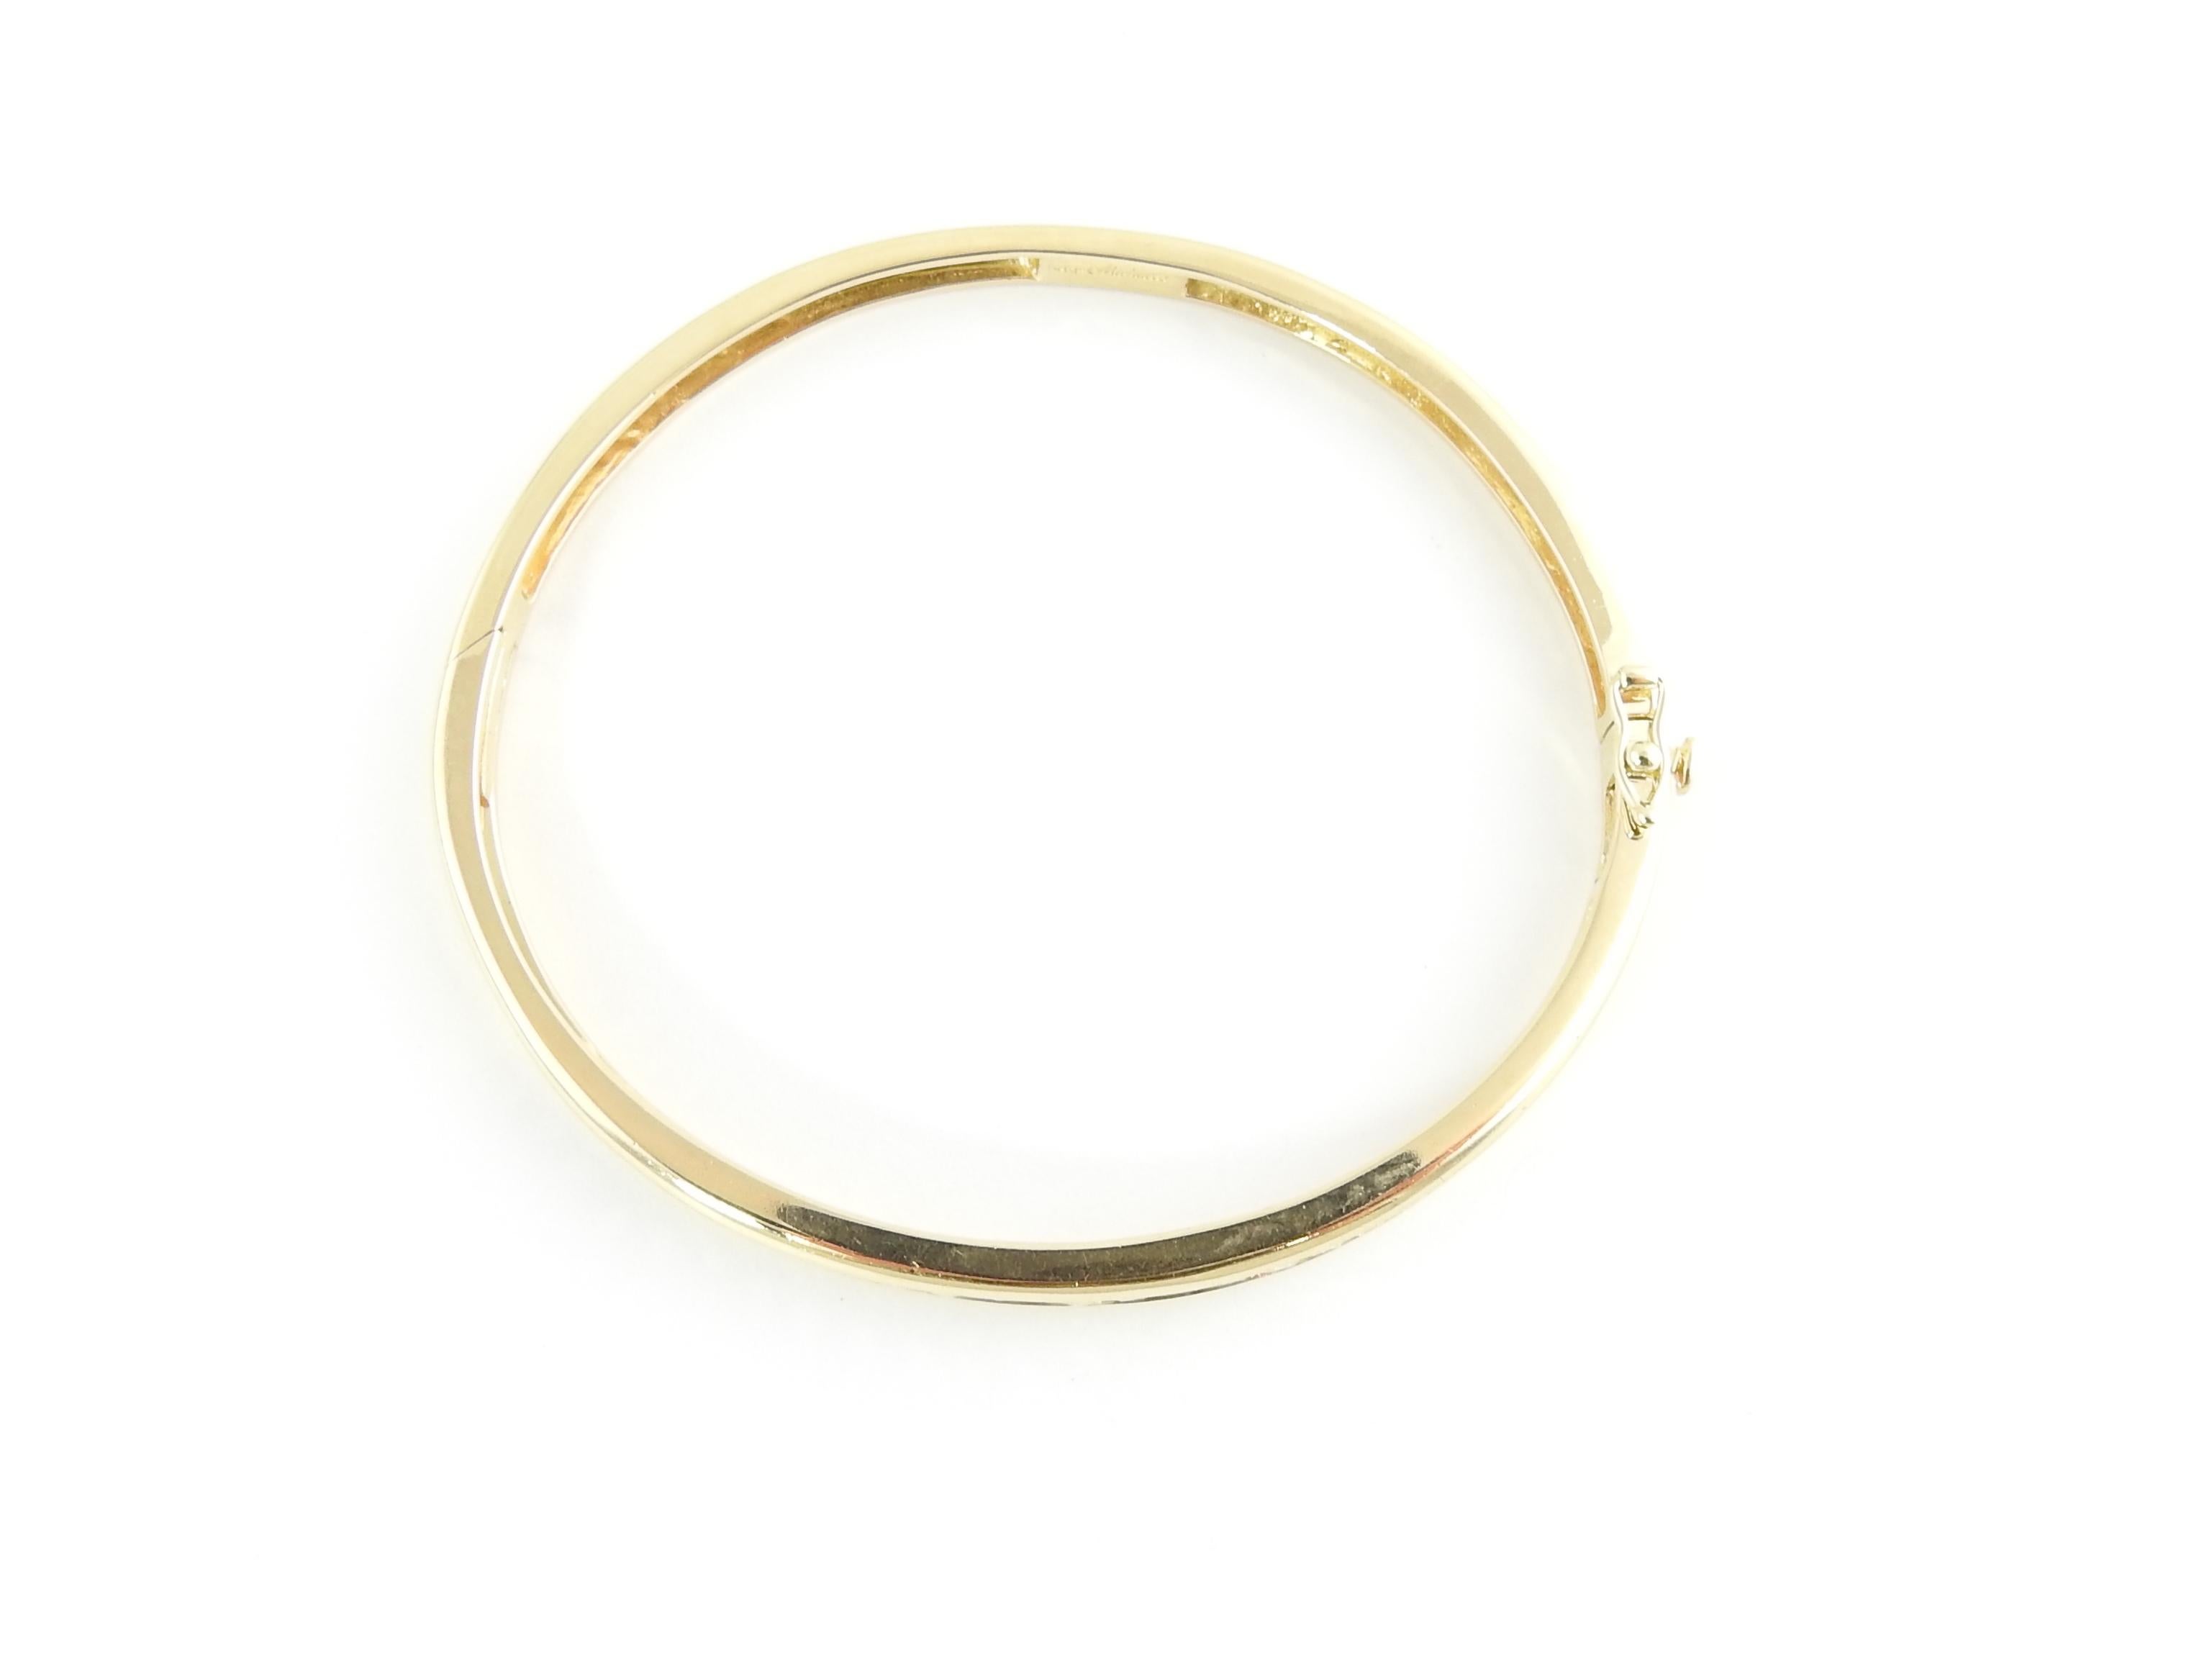 14 Karat Yellow Gold and Diamond Bangle Bracelet

This sparkling hinged bangle bracelet features 25 round brilliant cut diamonds set in classic 14K yellow gold.
Width: 5 mm.

Approximate total diamond weight: 1 ct.

Diamond color: G

Diamond